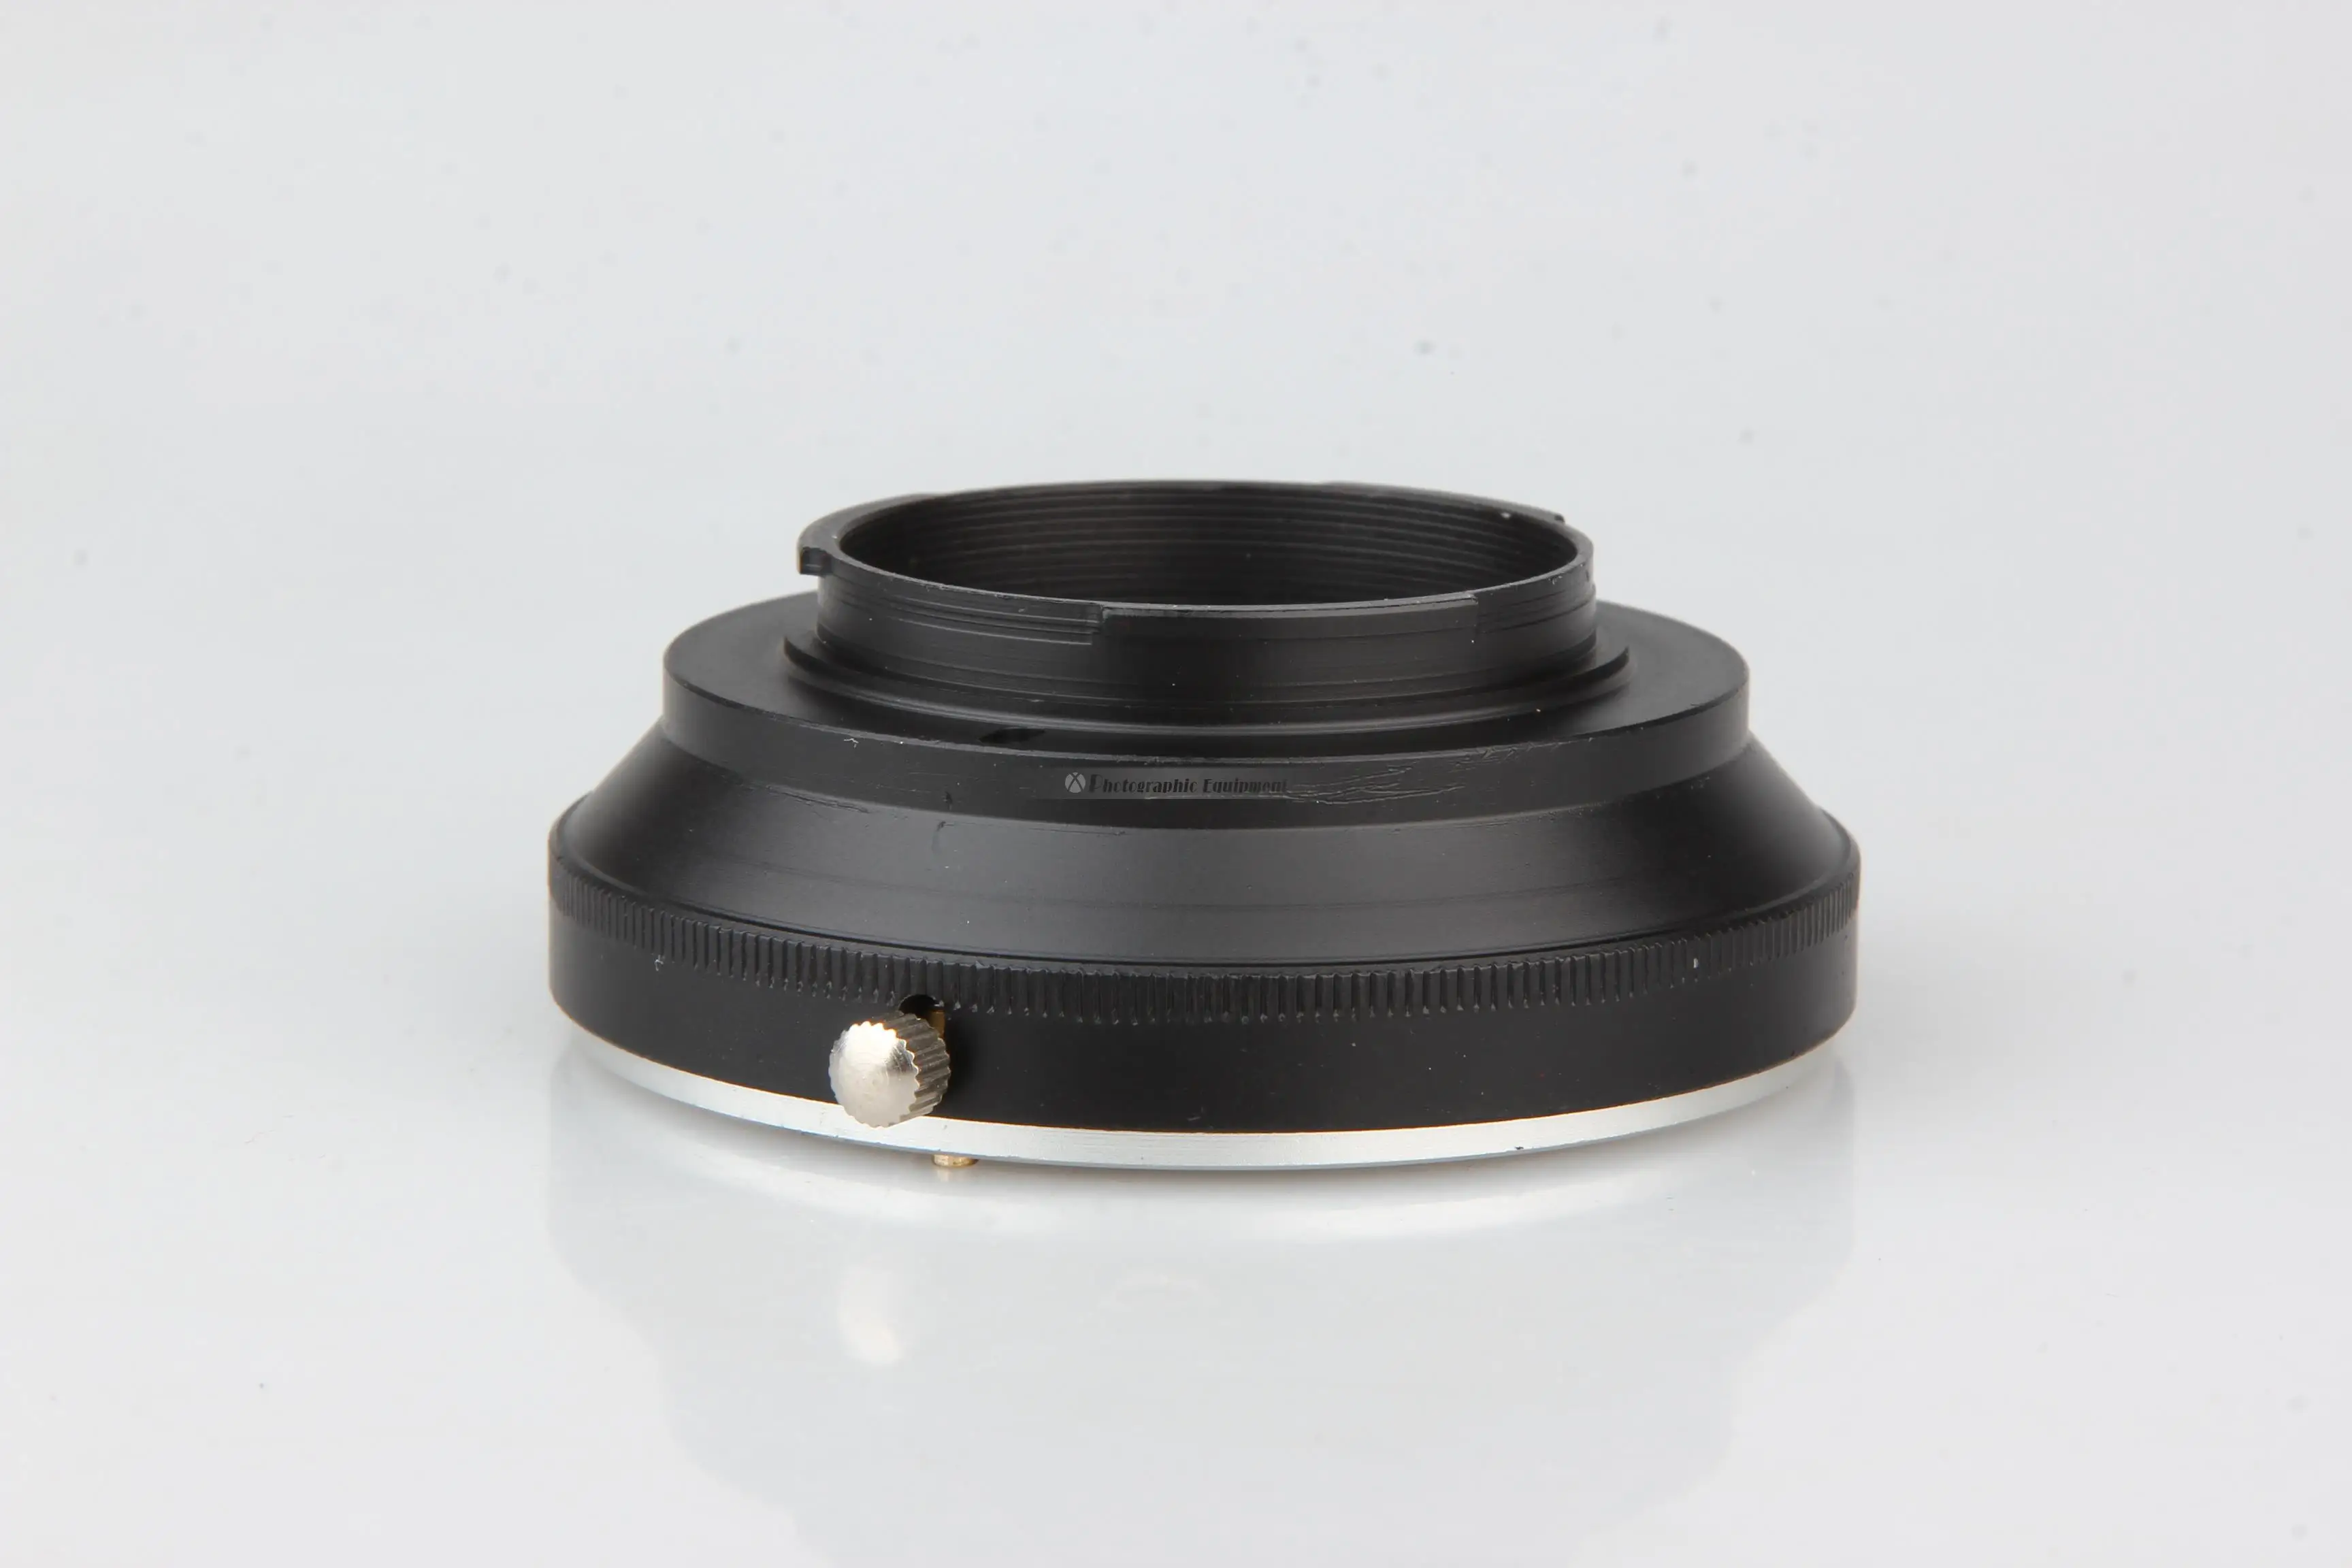 For Canon EOS EF Lens to NX Mount Camera Lens Adapter Ring for Samsung NX1 NX10 NX30 NX300 NX500 NX1000 NX2000 NX3000